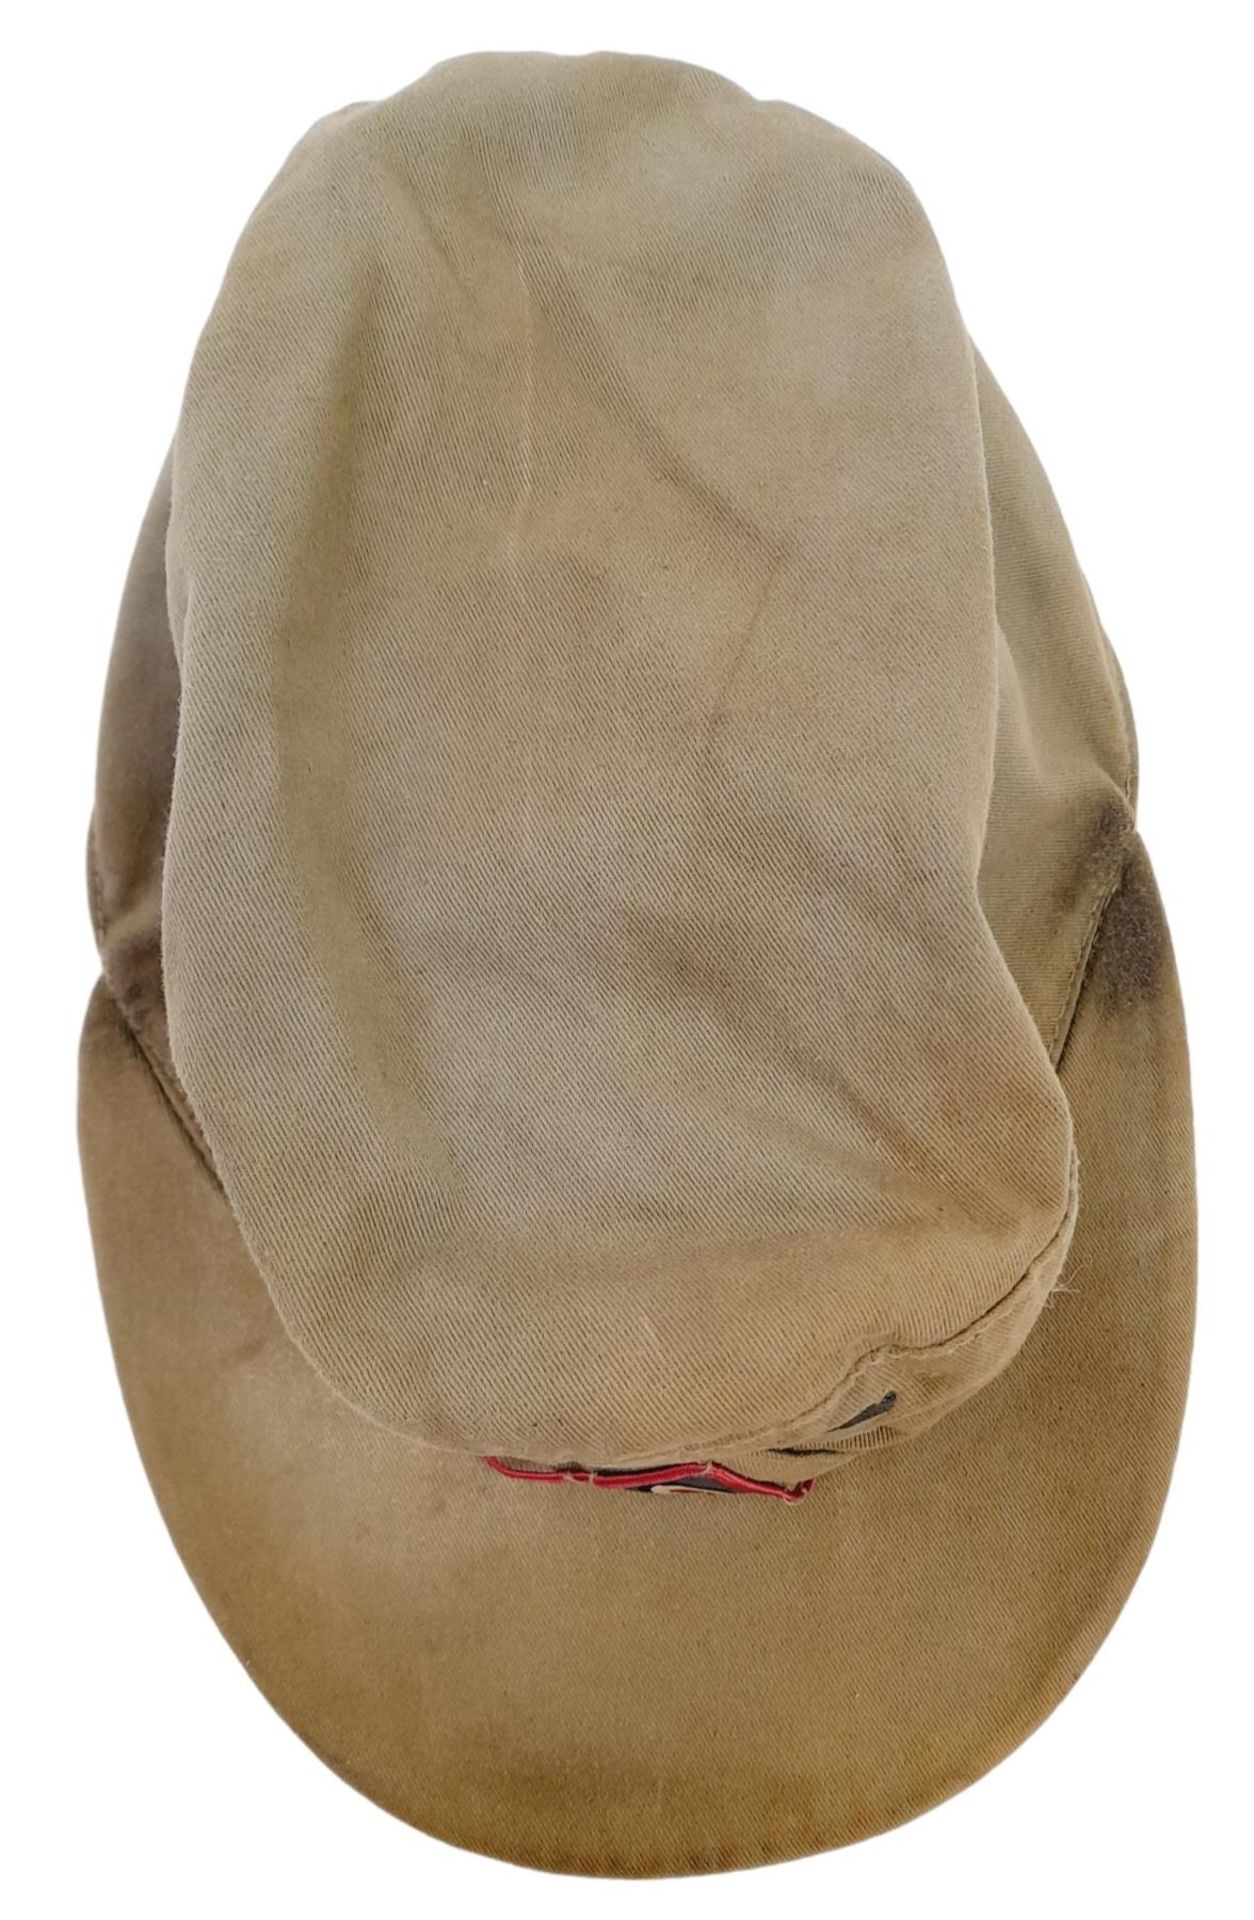 In Country Made Lightweight Africa Corps Artillery Cap. (No Vents) This is a typical example of a - Bild 4 aus 6